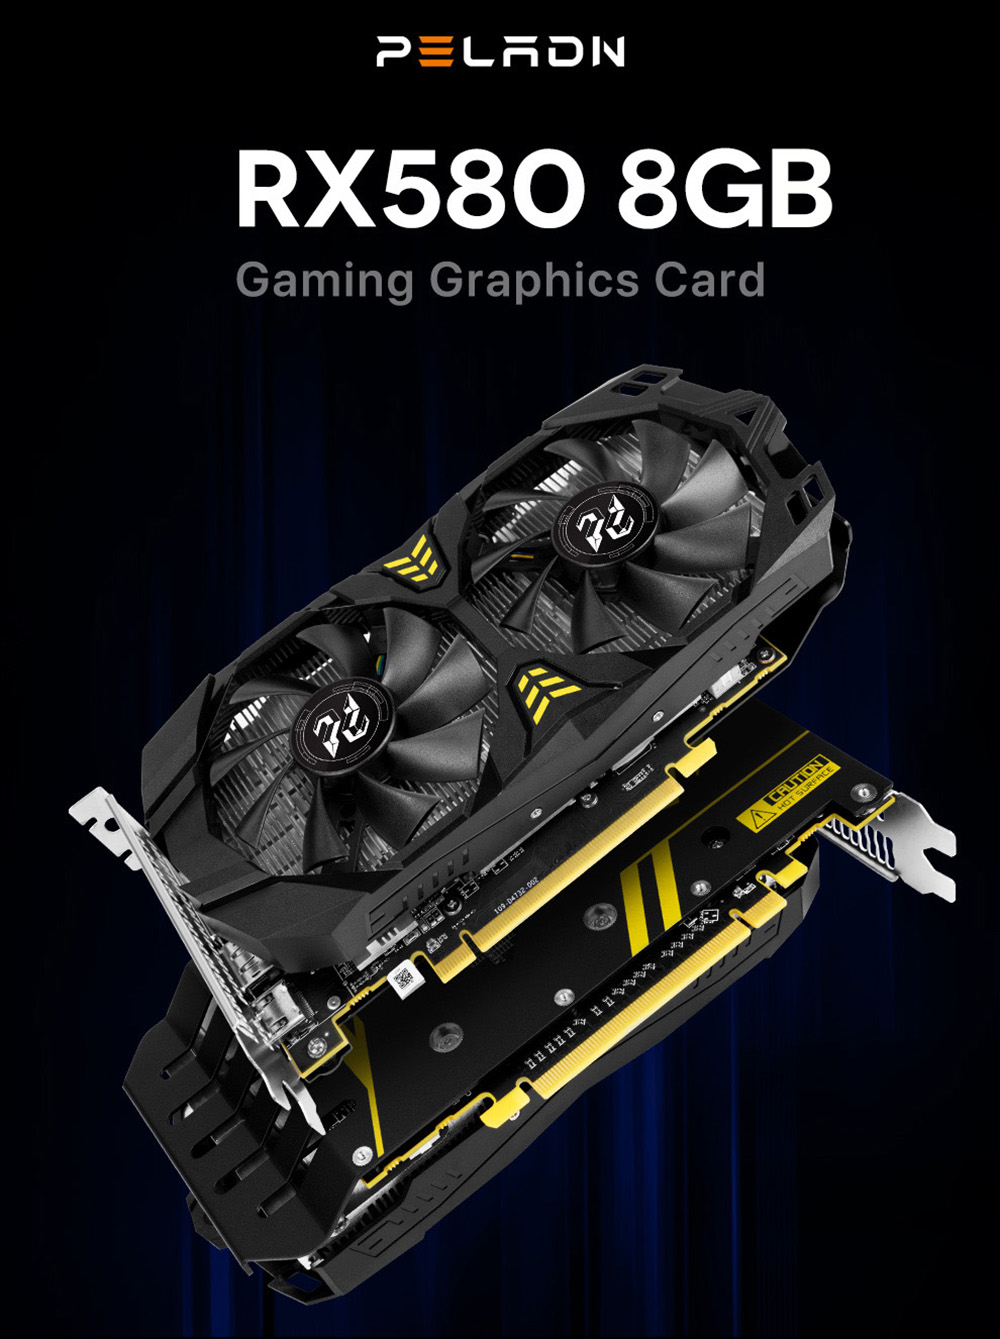 89€ with Coupon for Peladn AMD Radeon RX 580 8GB Graphics Cards, 3xDP - GEEKBUYING